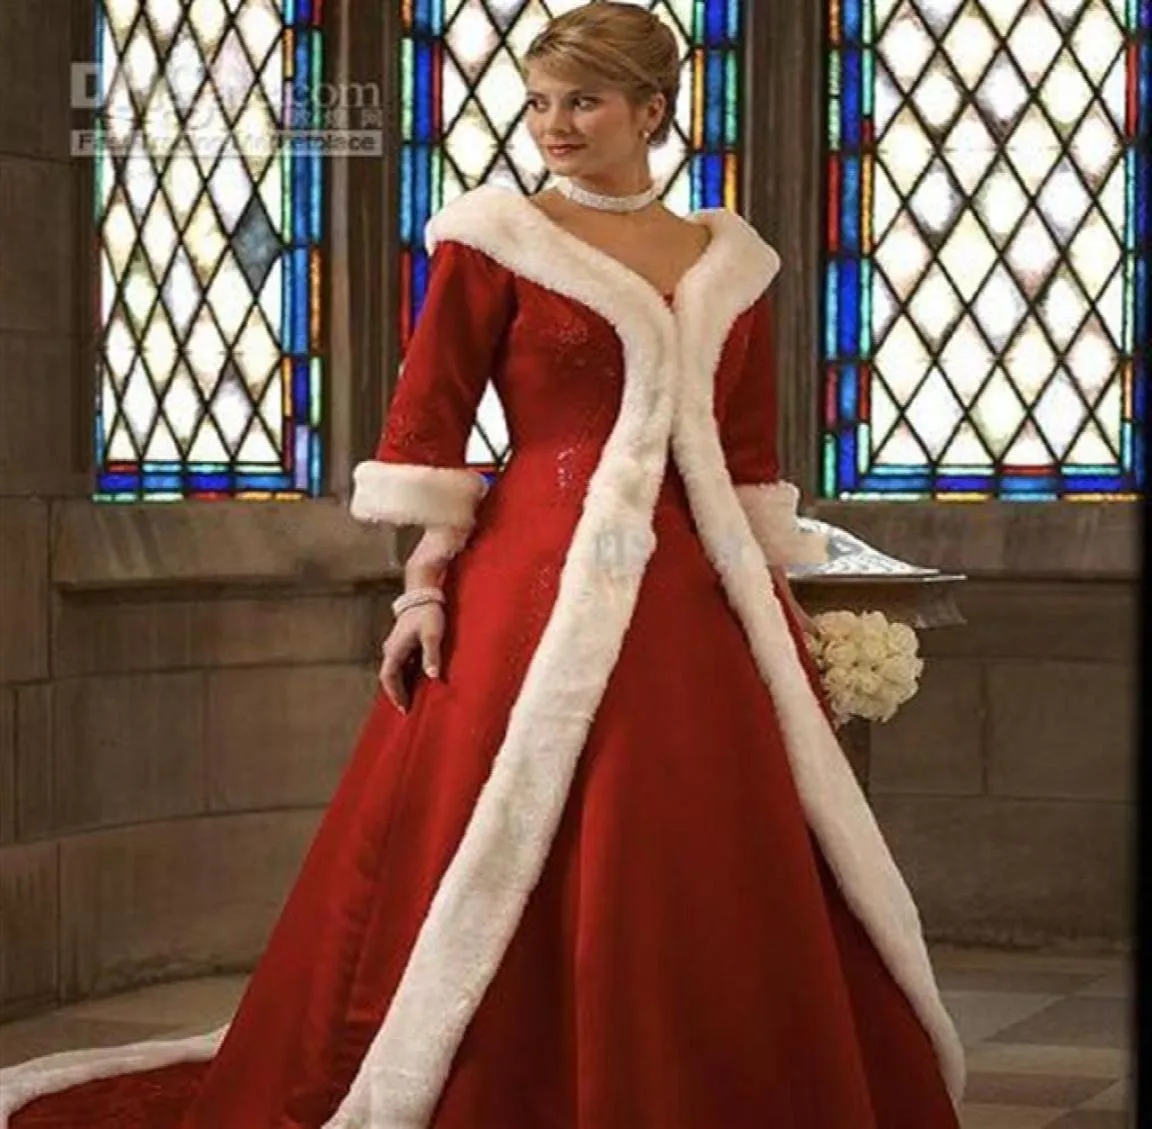 New Long Sleeves Cloak Winter Ball Gown Wedding Dresses Red Warm Formal Dresses For Women Fur Appliques Christmas Gown Jacket 20118878493